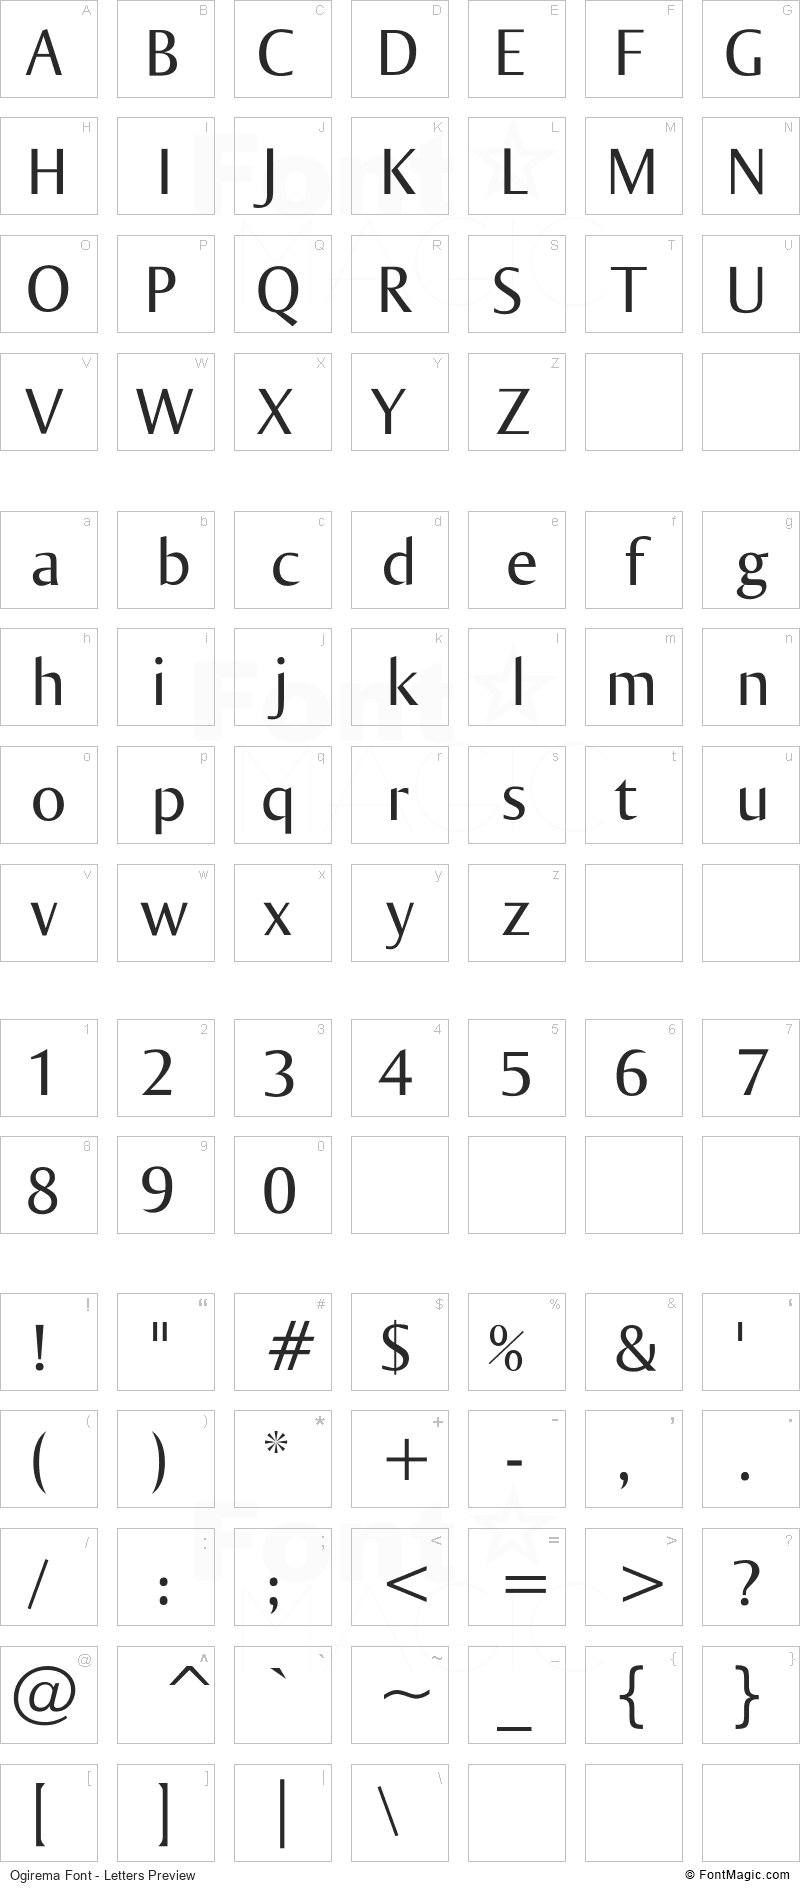 Ogirema Font - All Latters Preview Chart